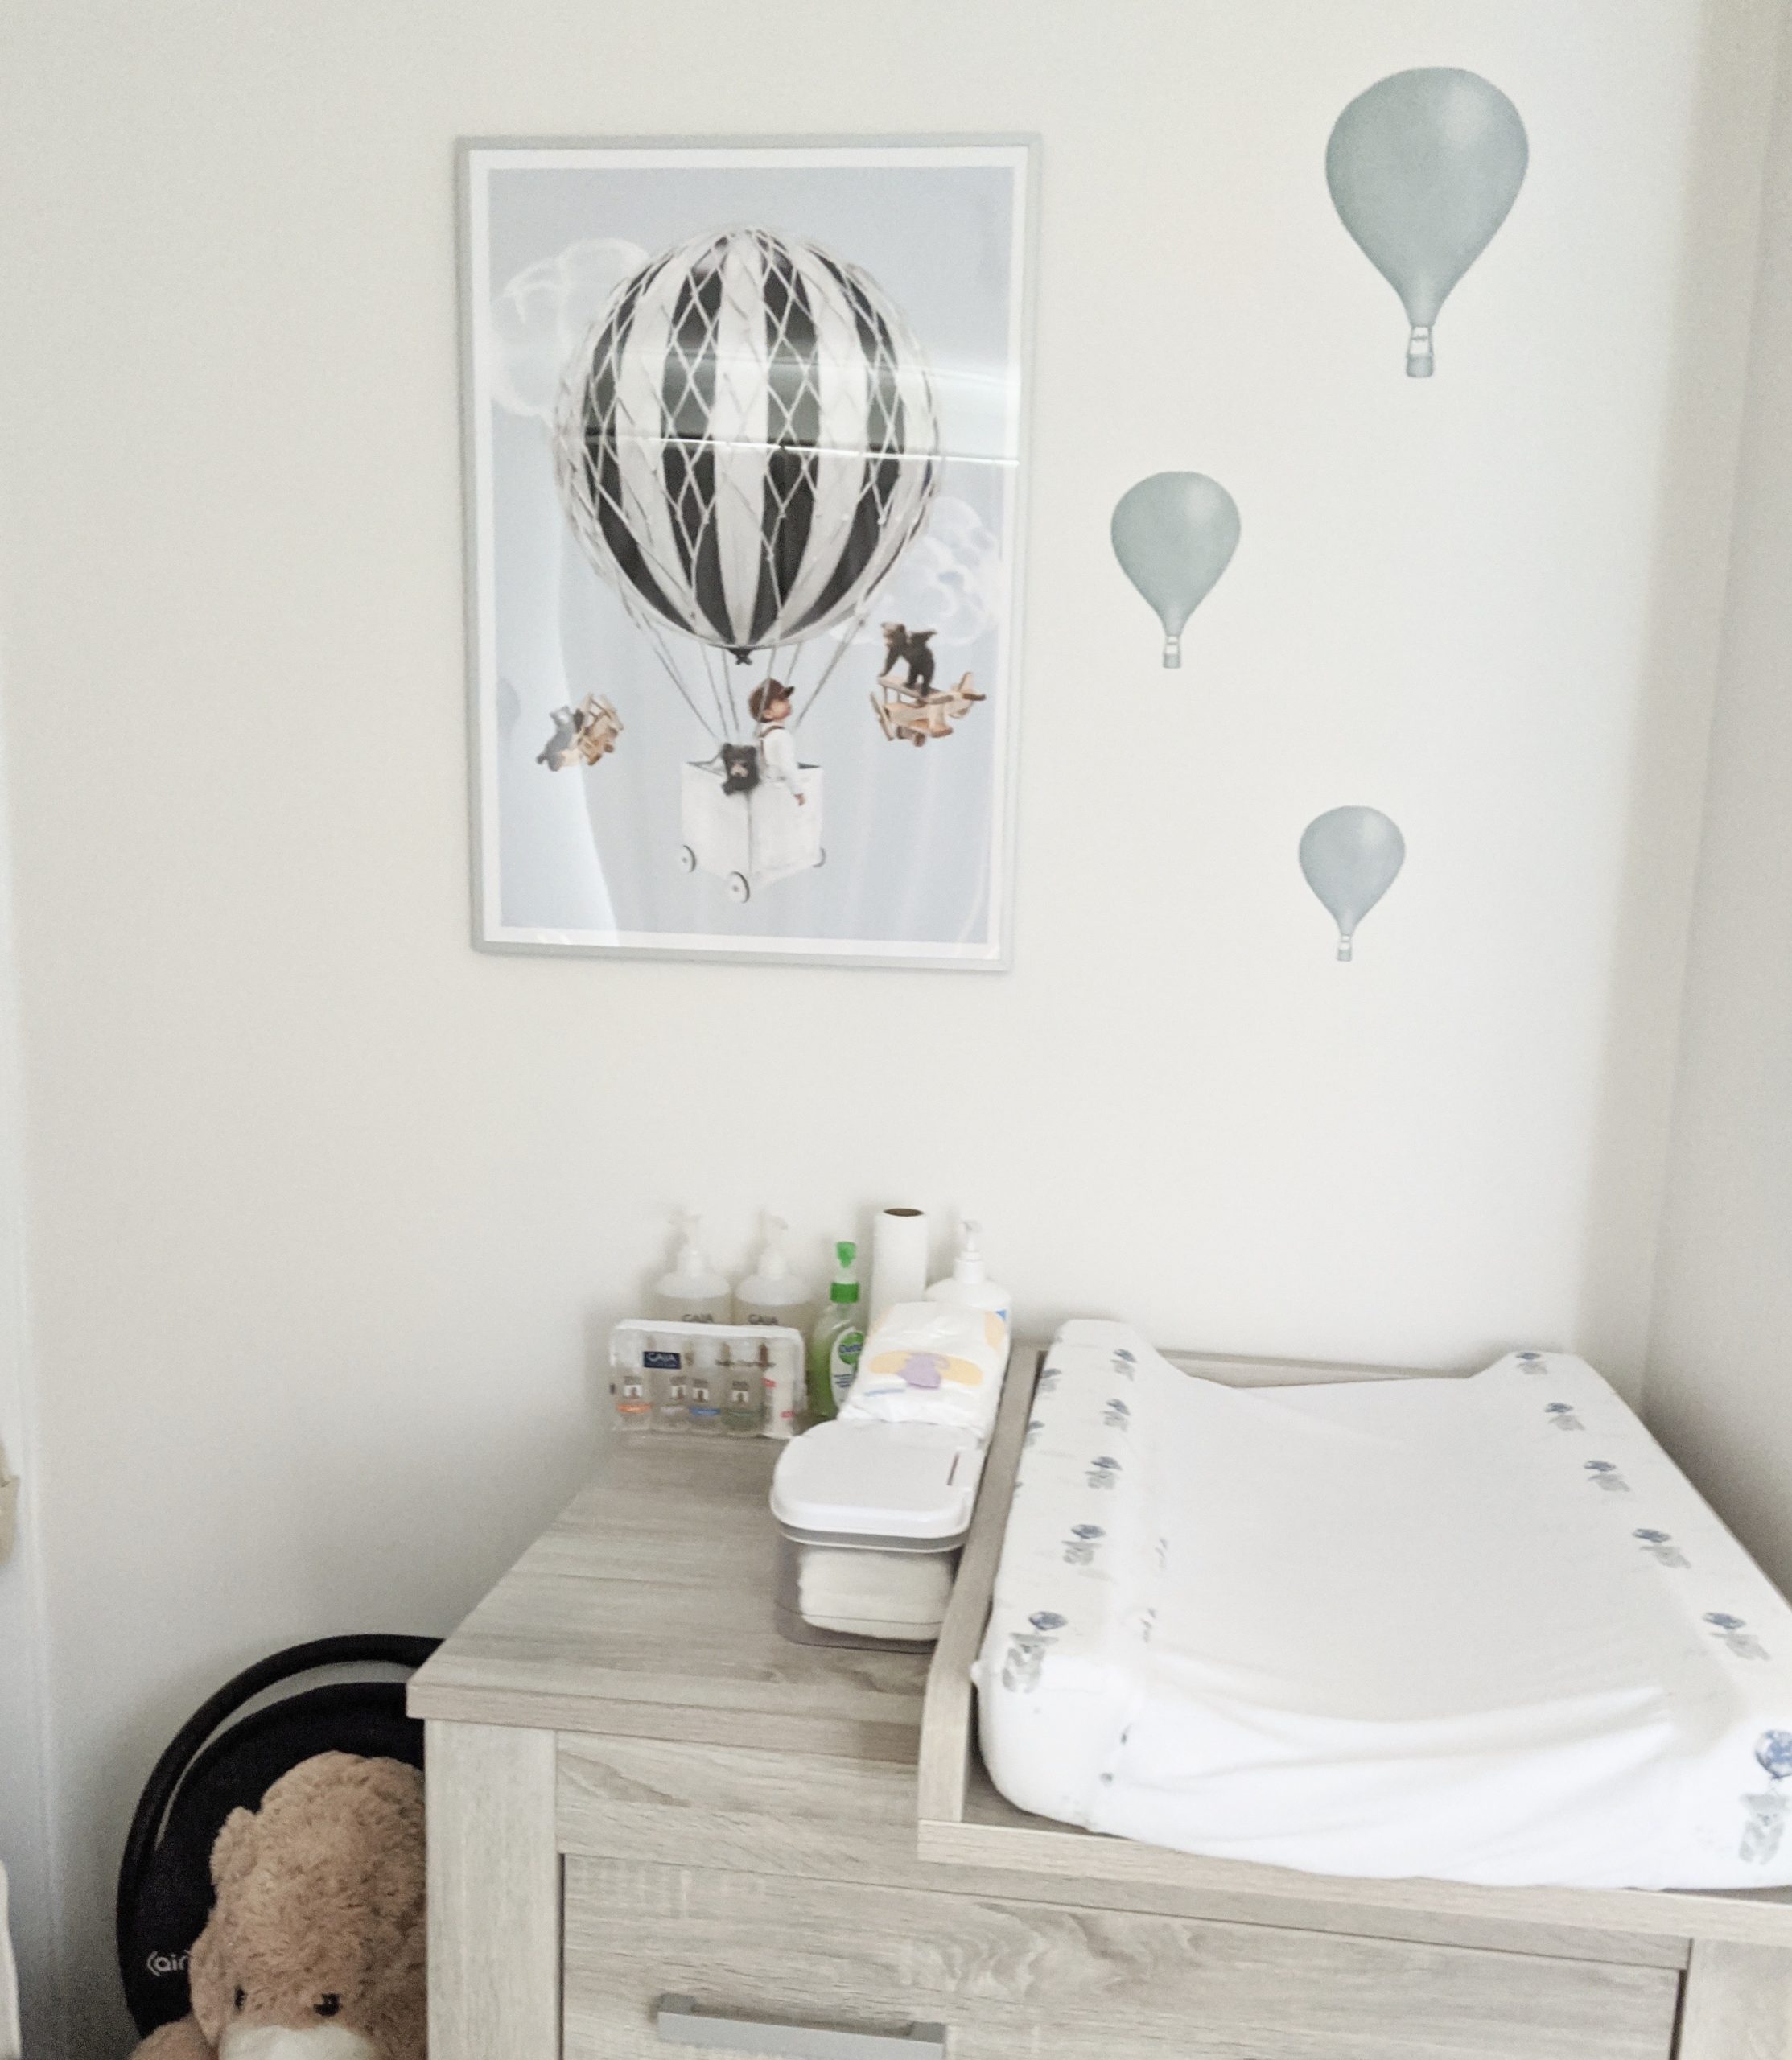 Changing table and changing mat on top with nursery wall print and light blue balloon wall stickers above it